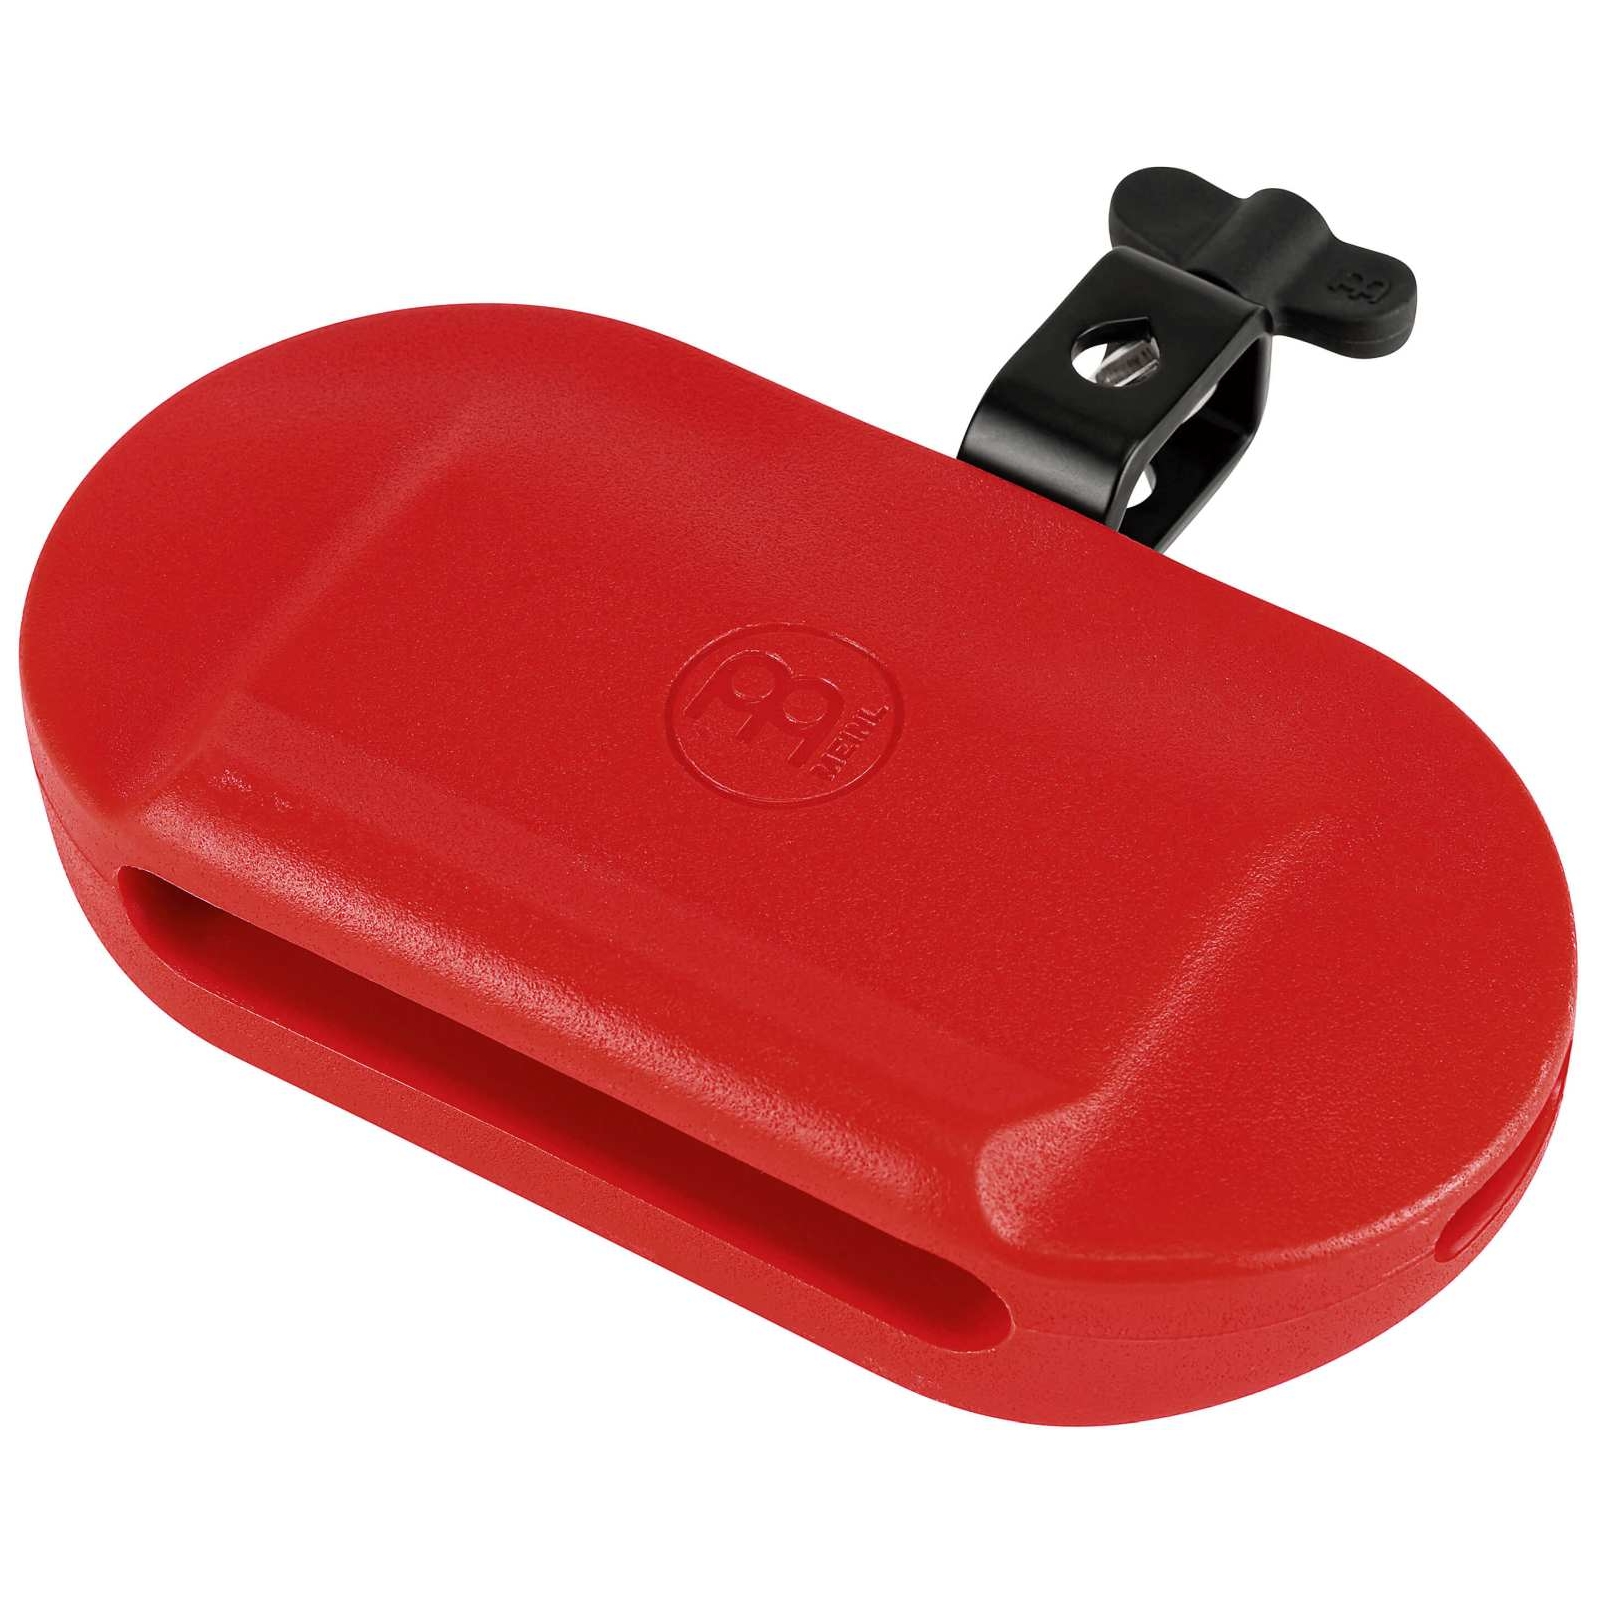 Meinl Percussion MPE4R - Percussion Block, Low Pitch, Red 